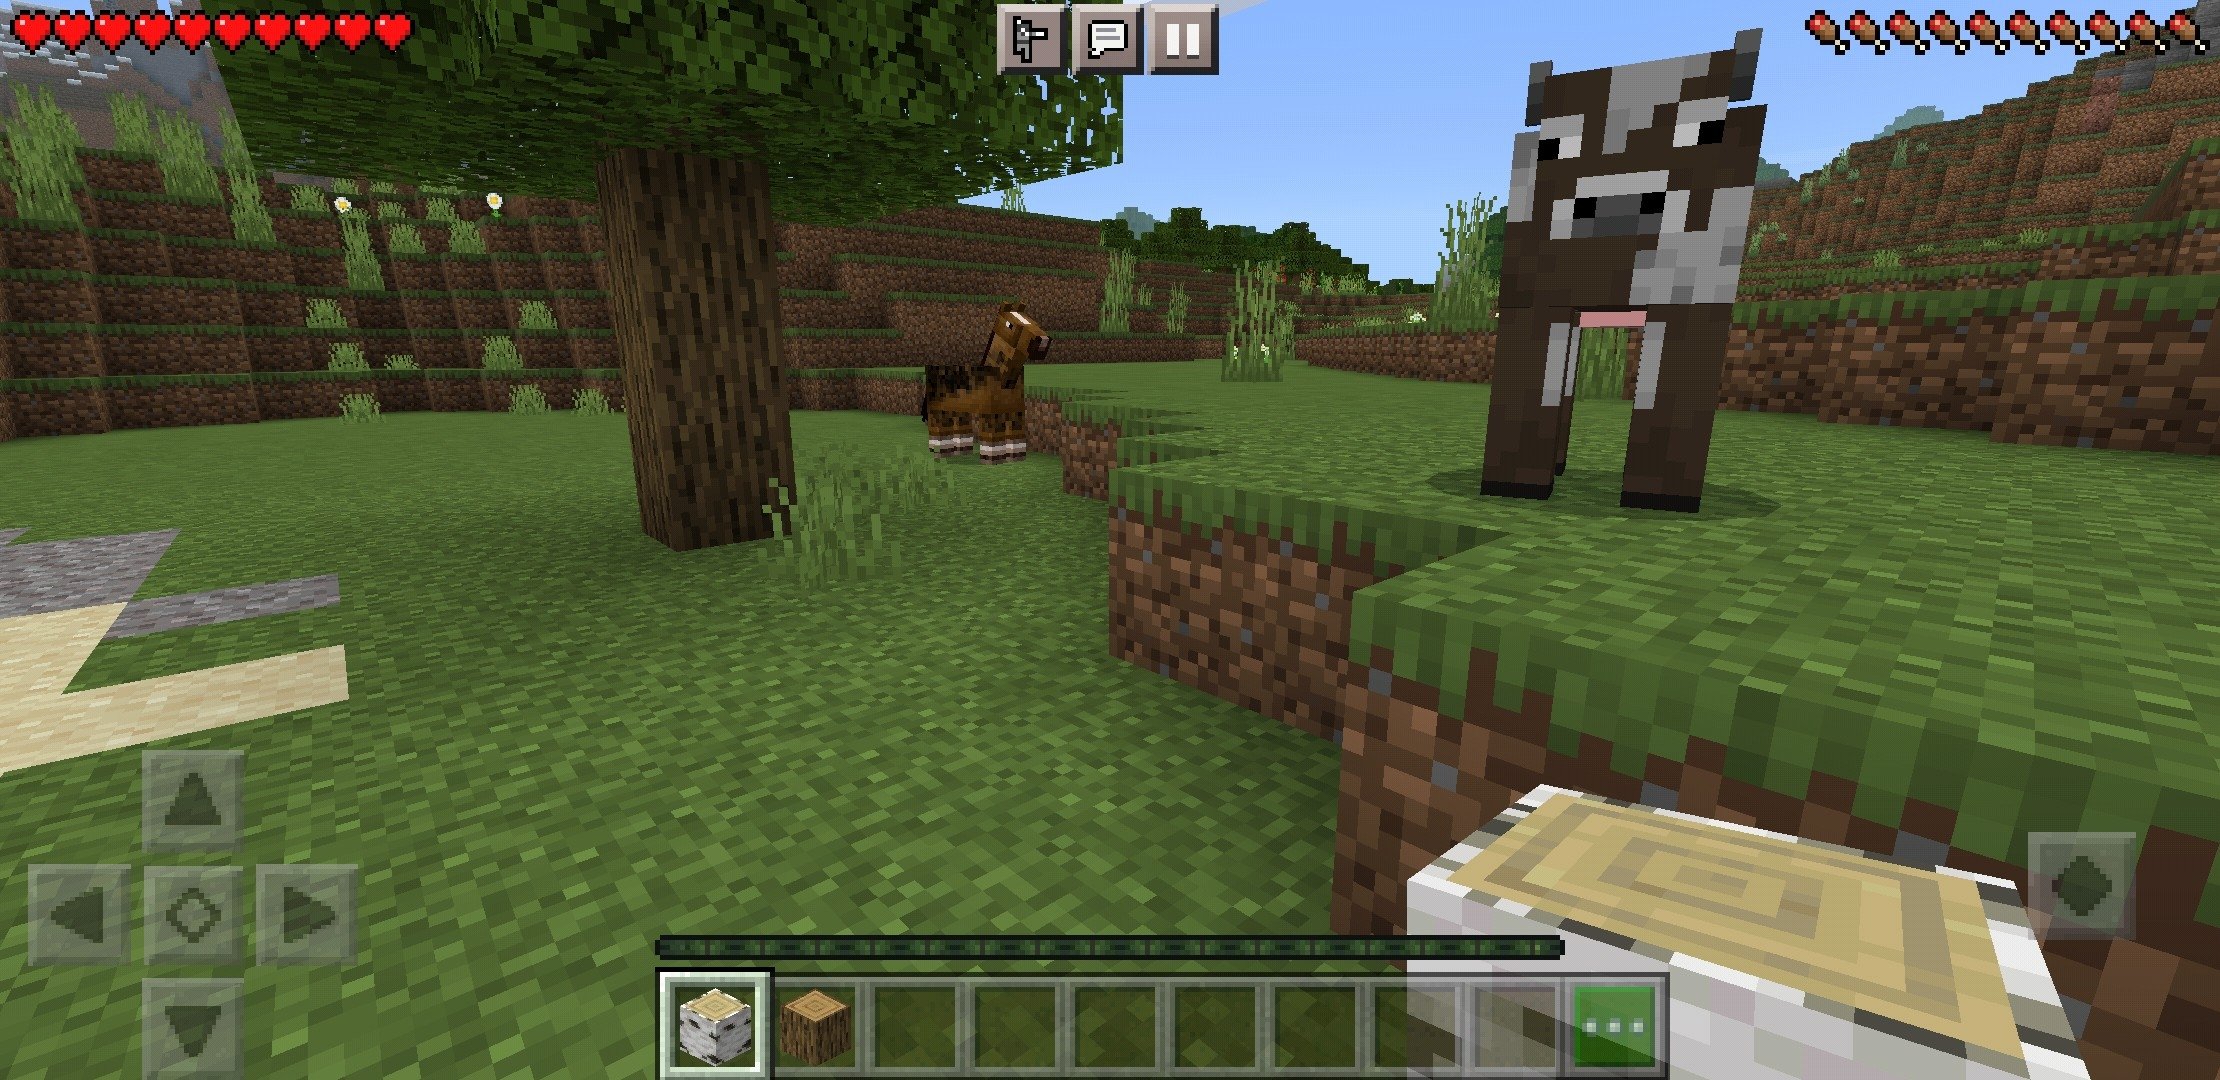 How to download minecraft for free on your phone